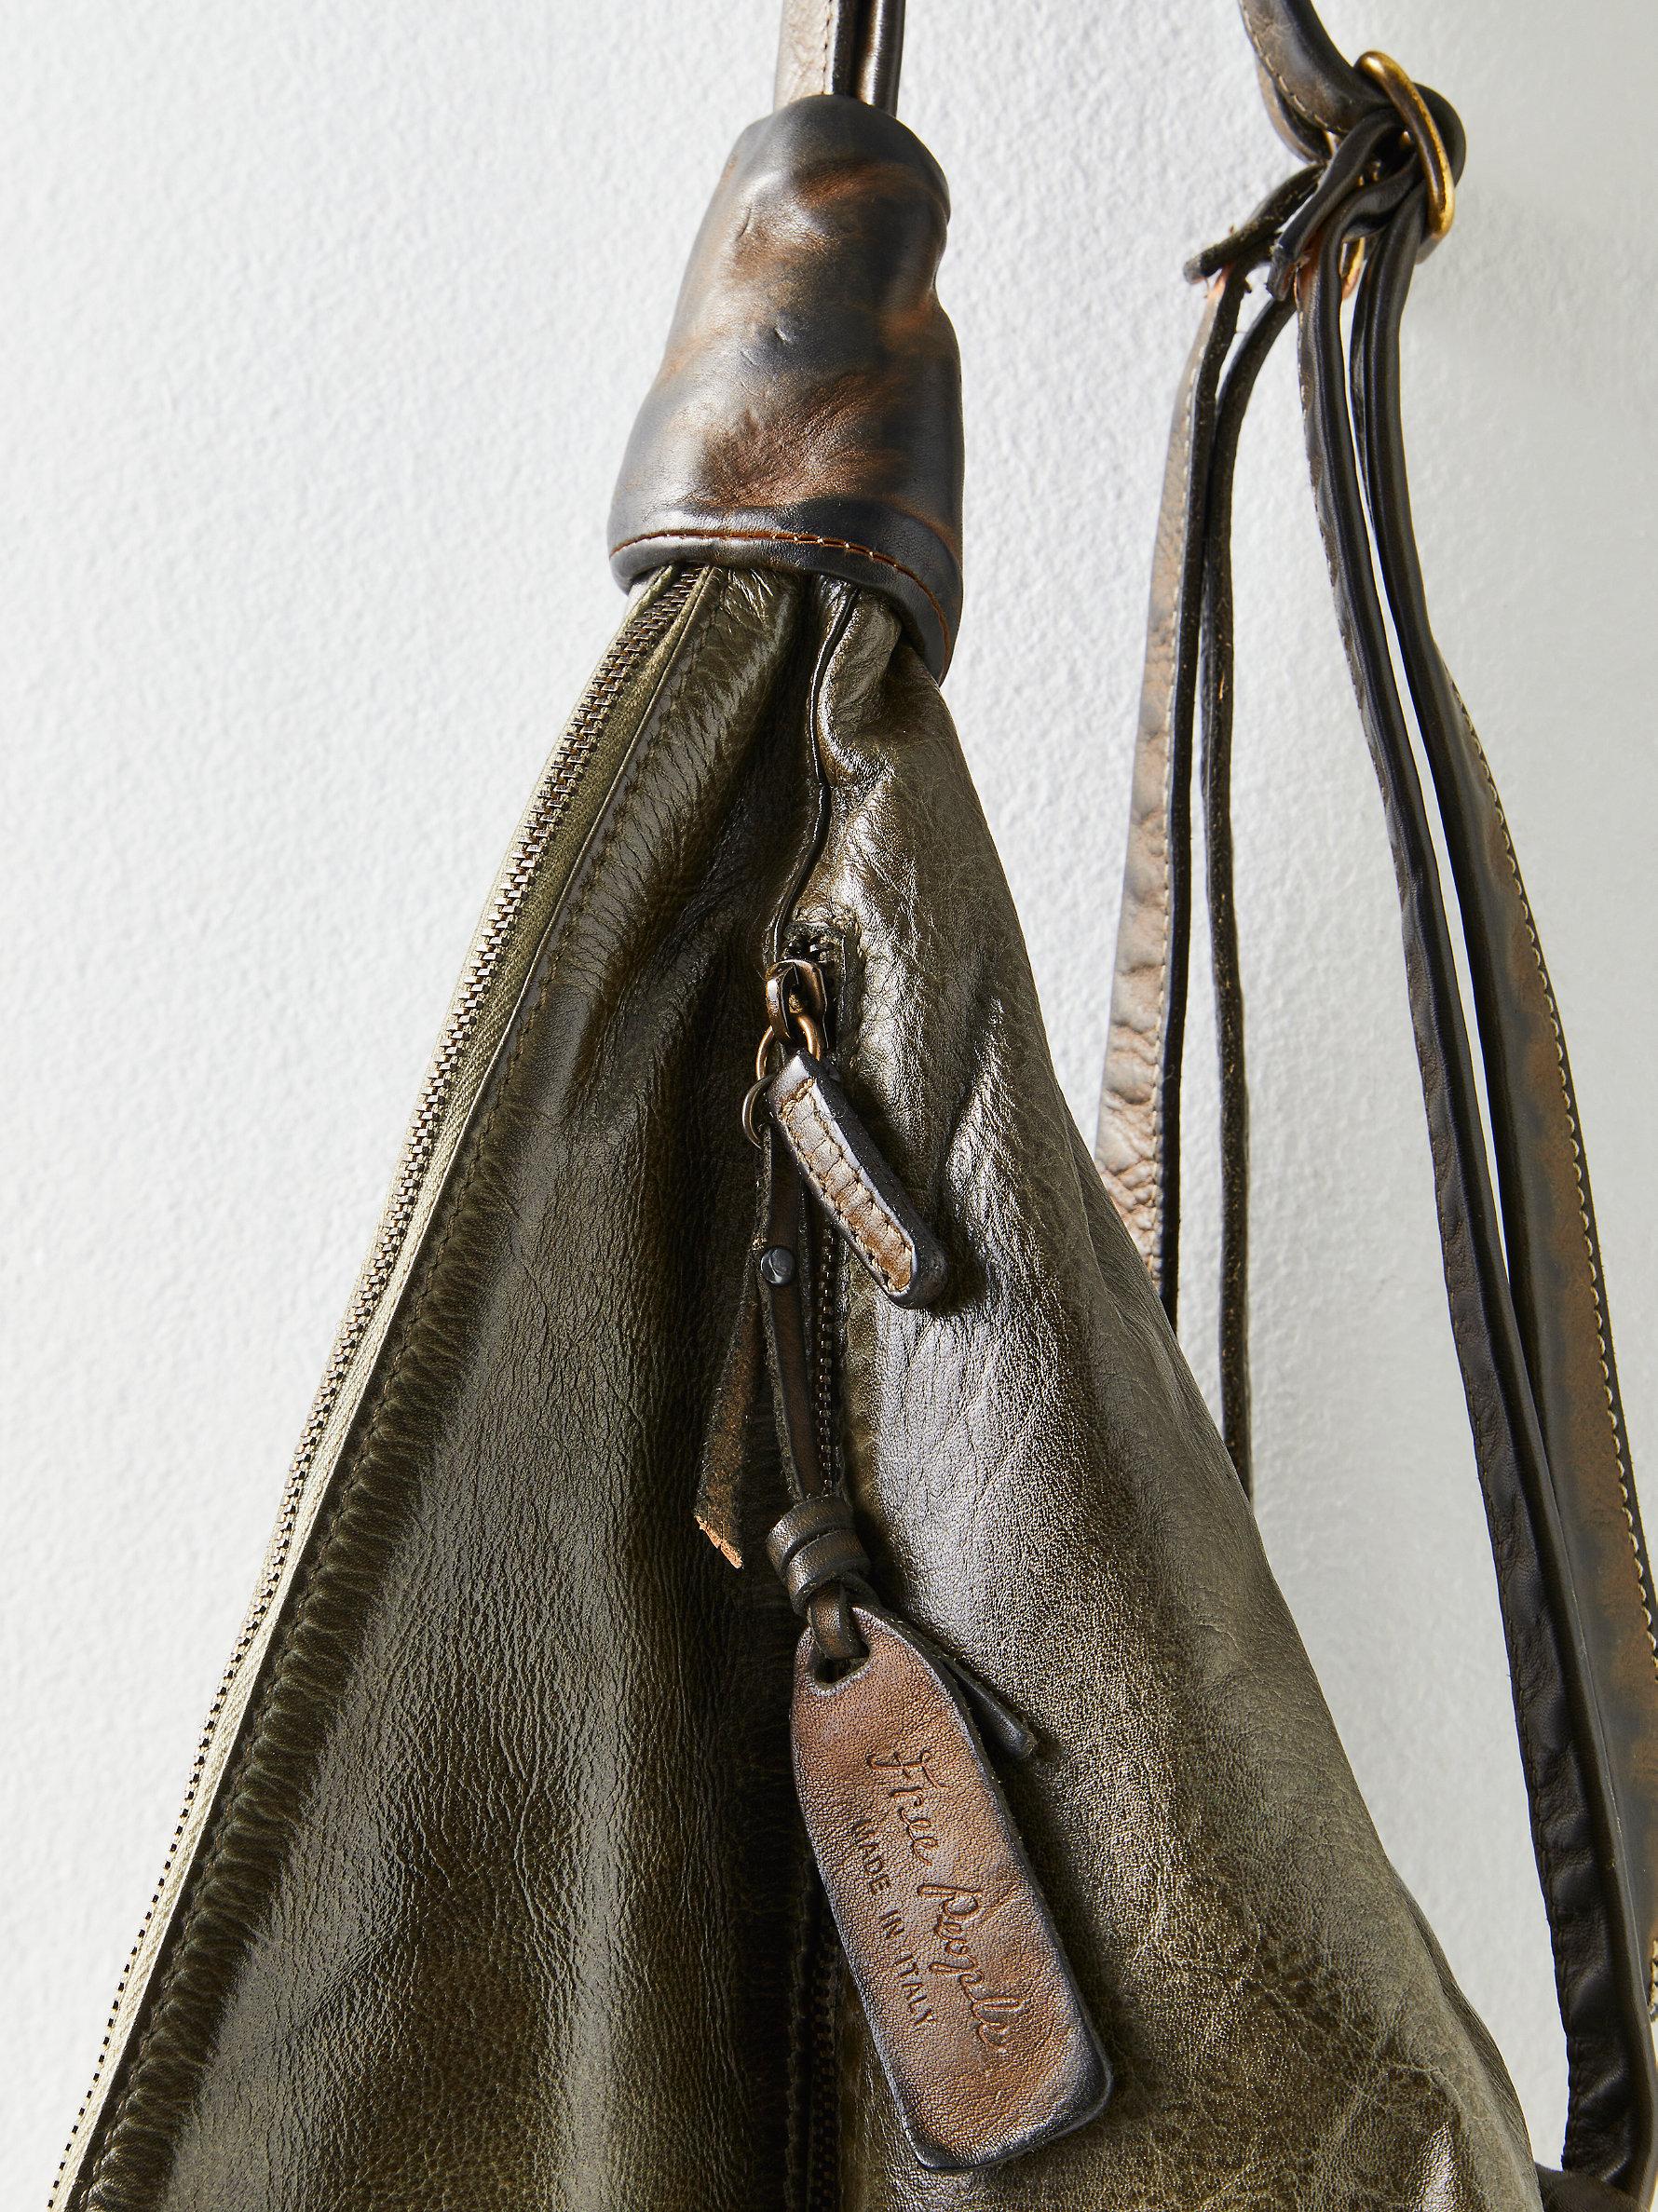 Made In Italy Leather Convertible Sling Backpack, The Leather Shop